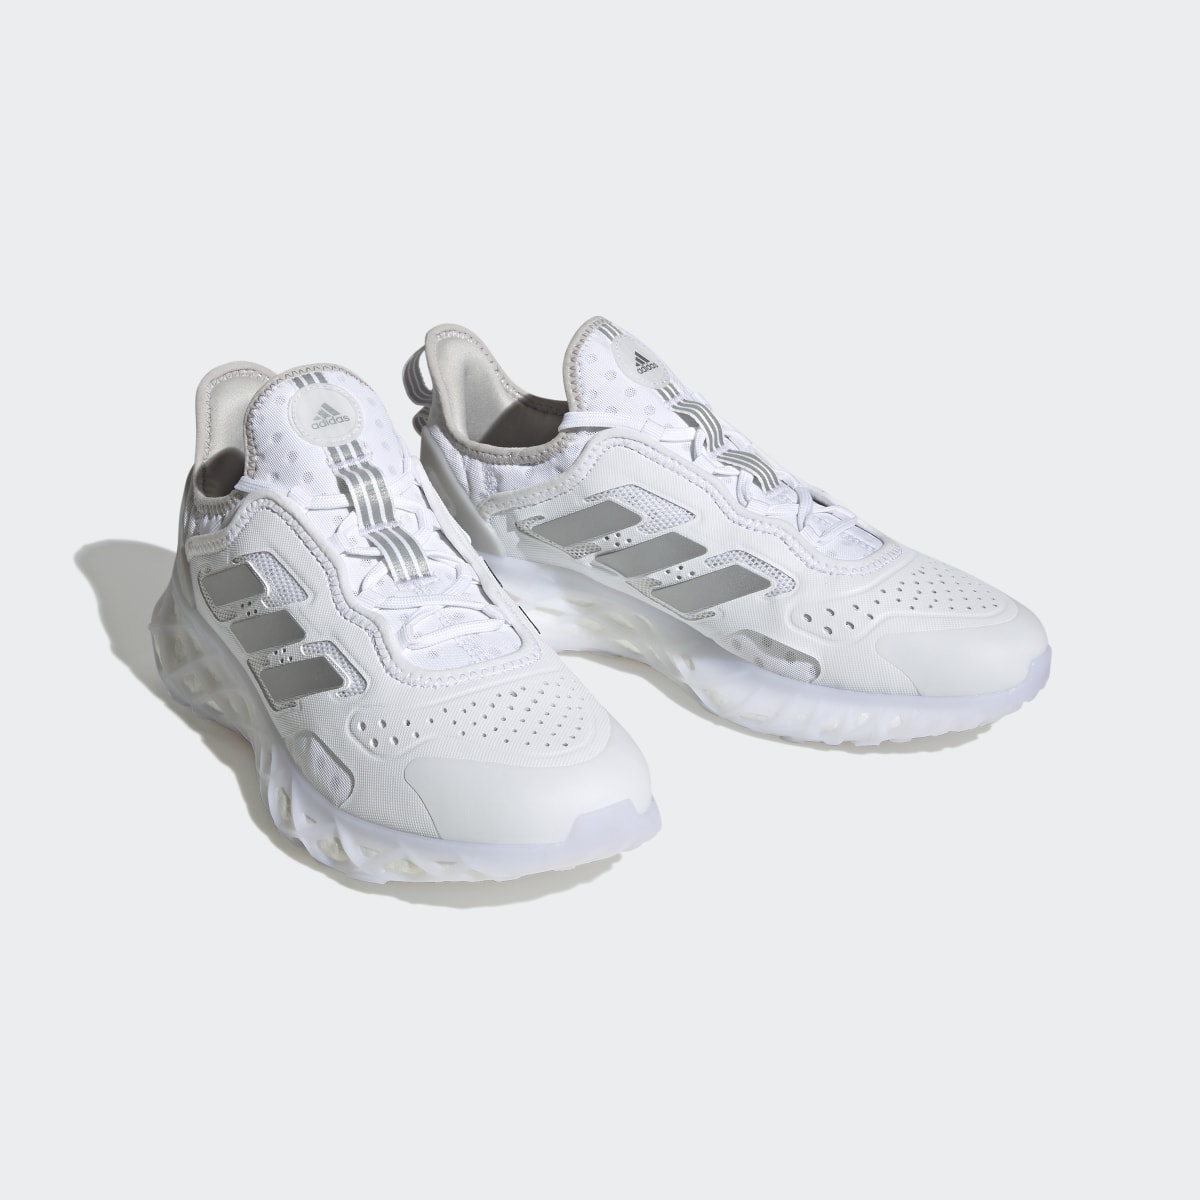 Adidas Web Boost Shoes. 5